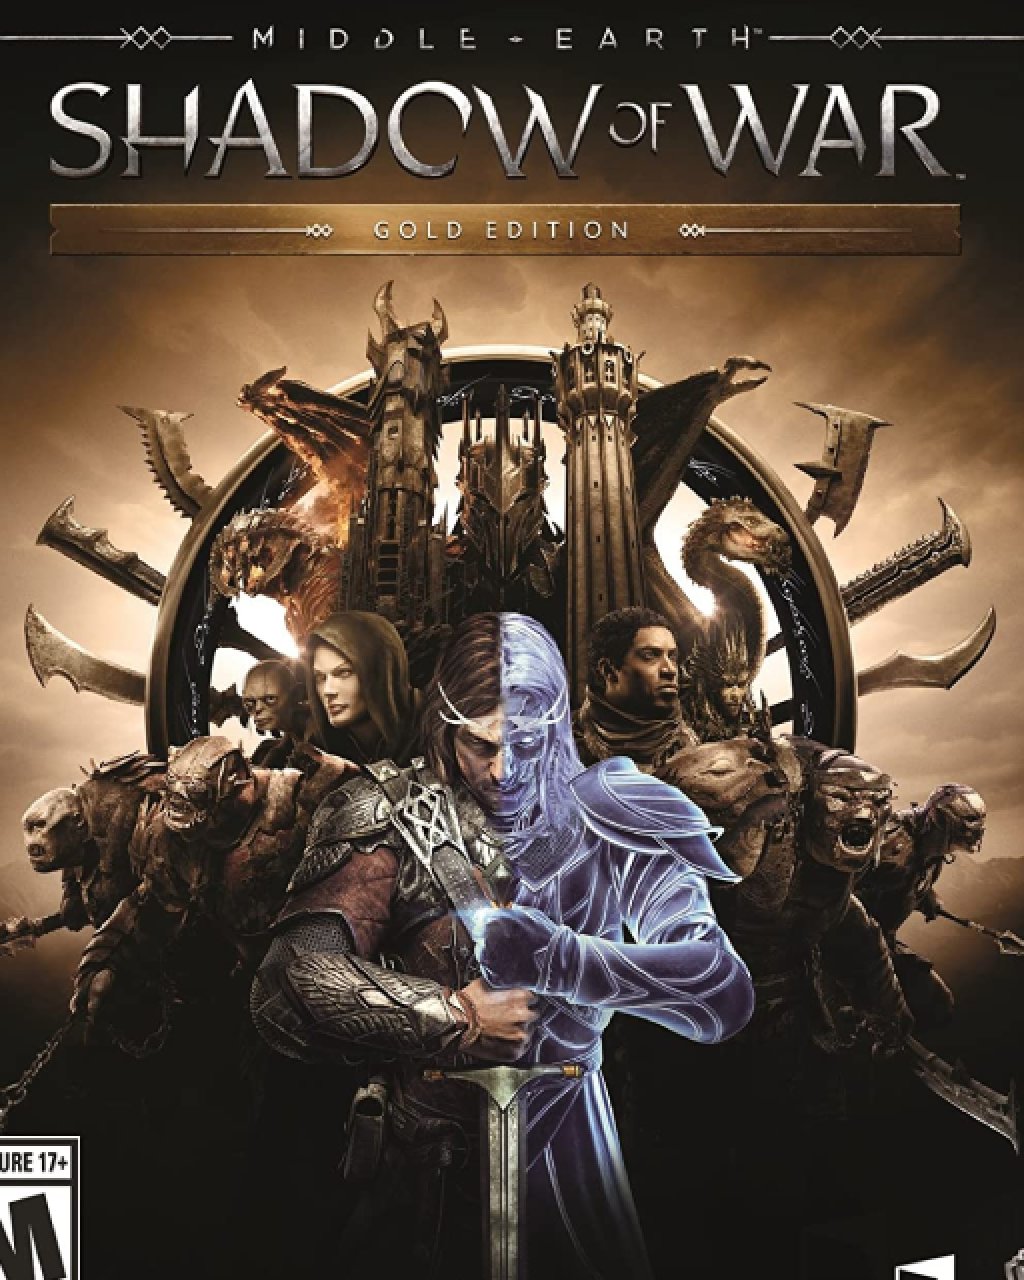 Middle-earth Shadow of War Gold Edition